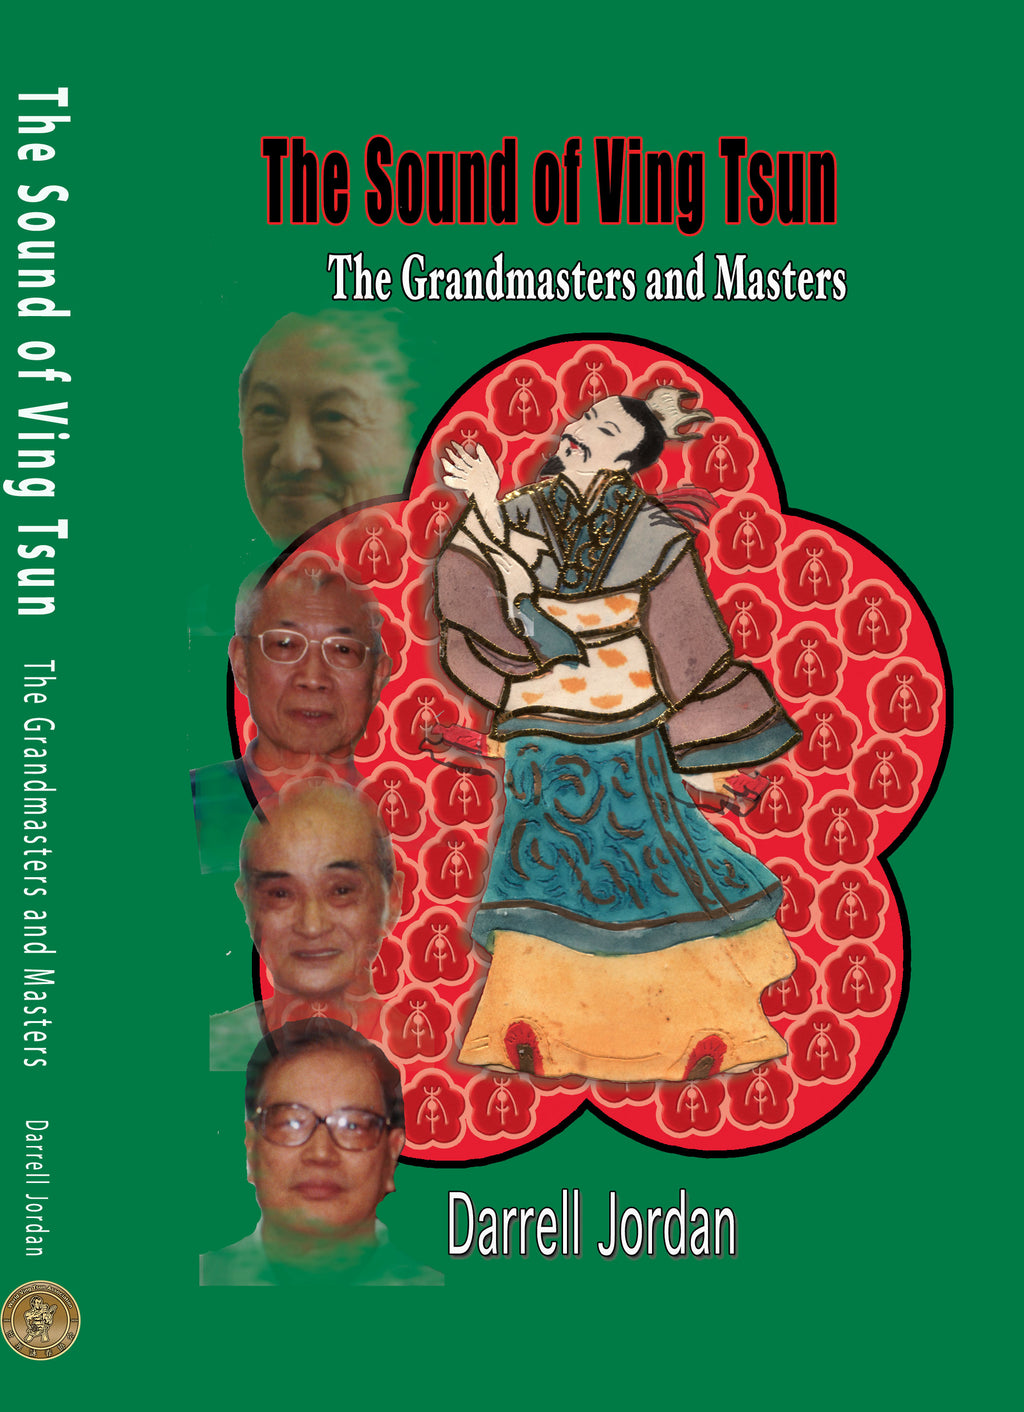 The Sound of Ving Tsun - The Grandmasters and Masters [Author Signed Copy]